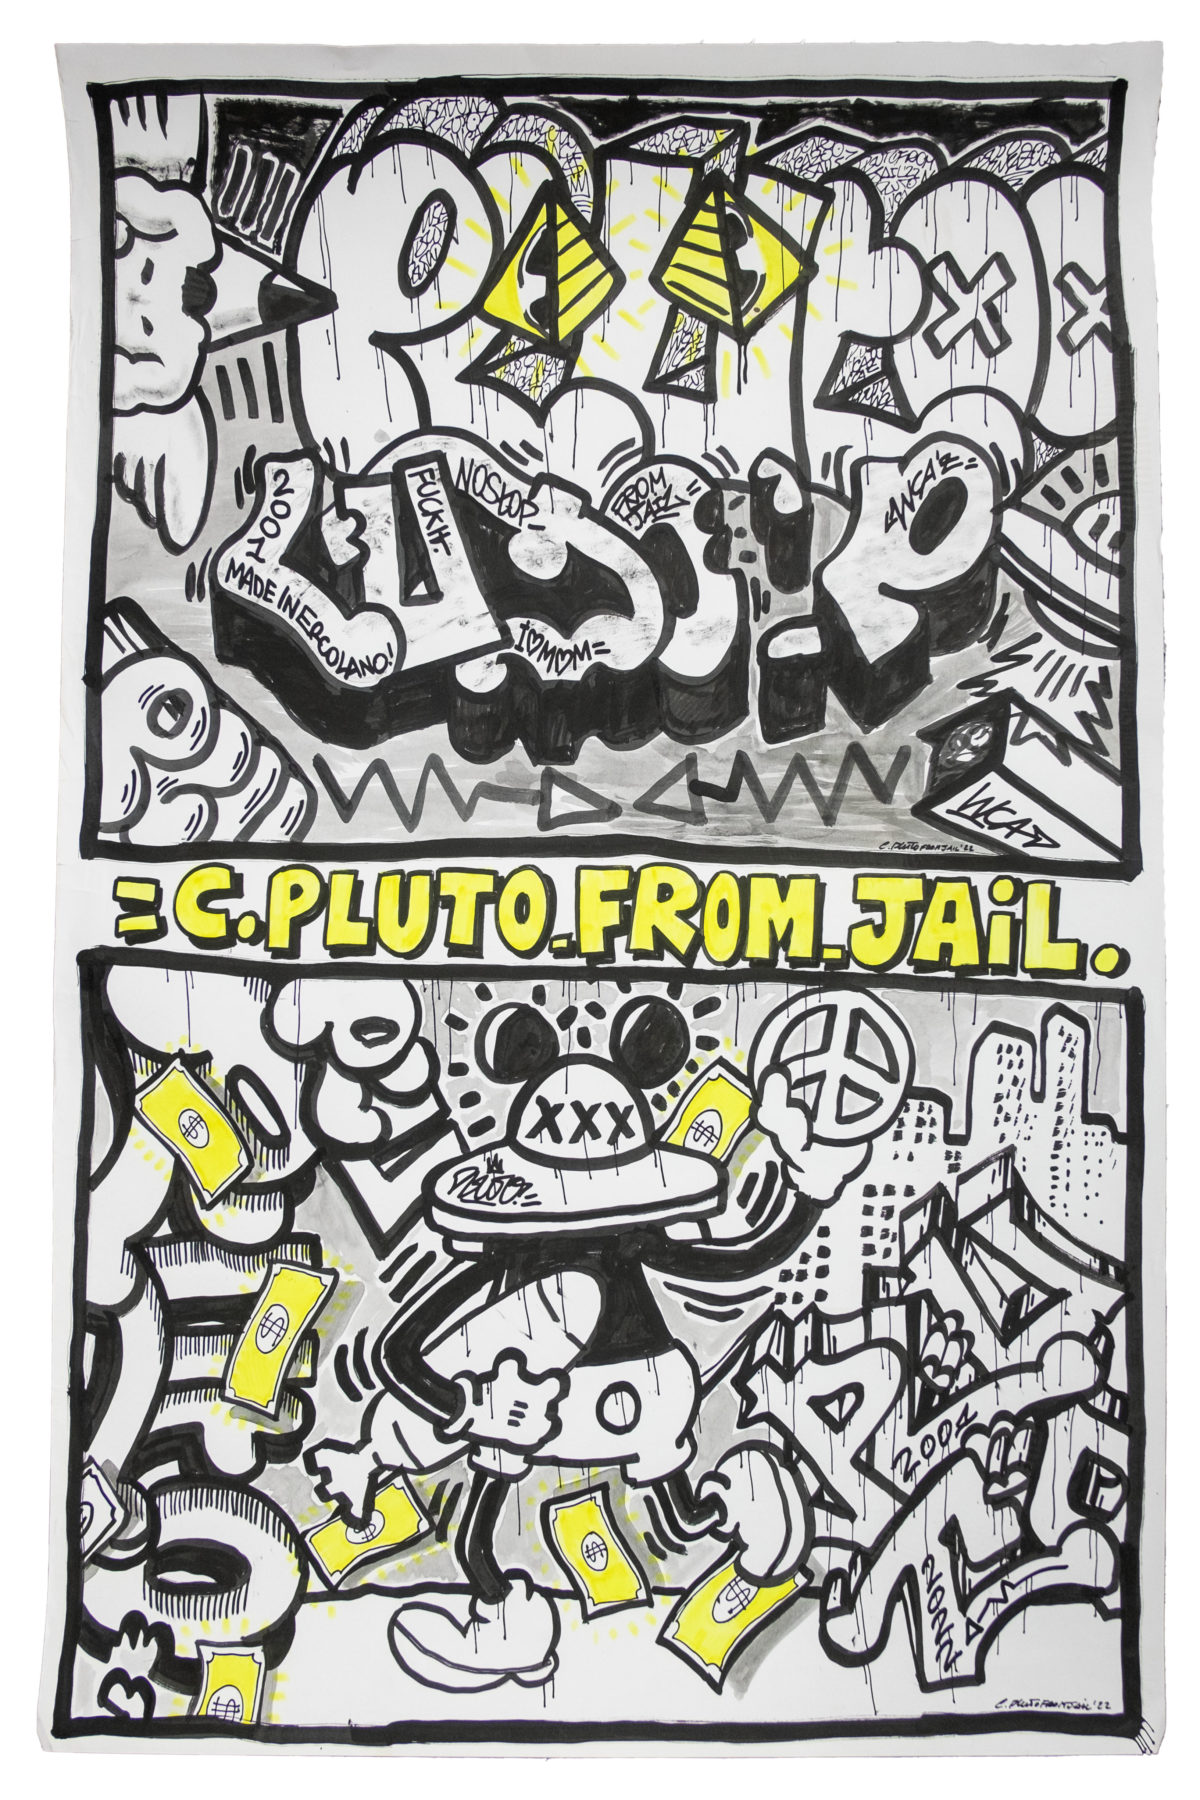 Pluto FROM JAIL 3